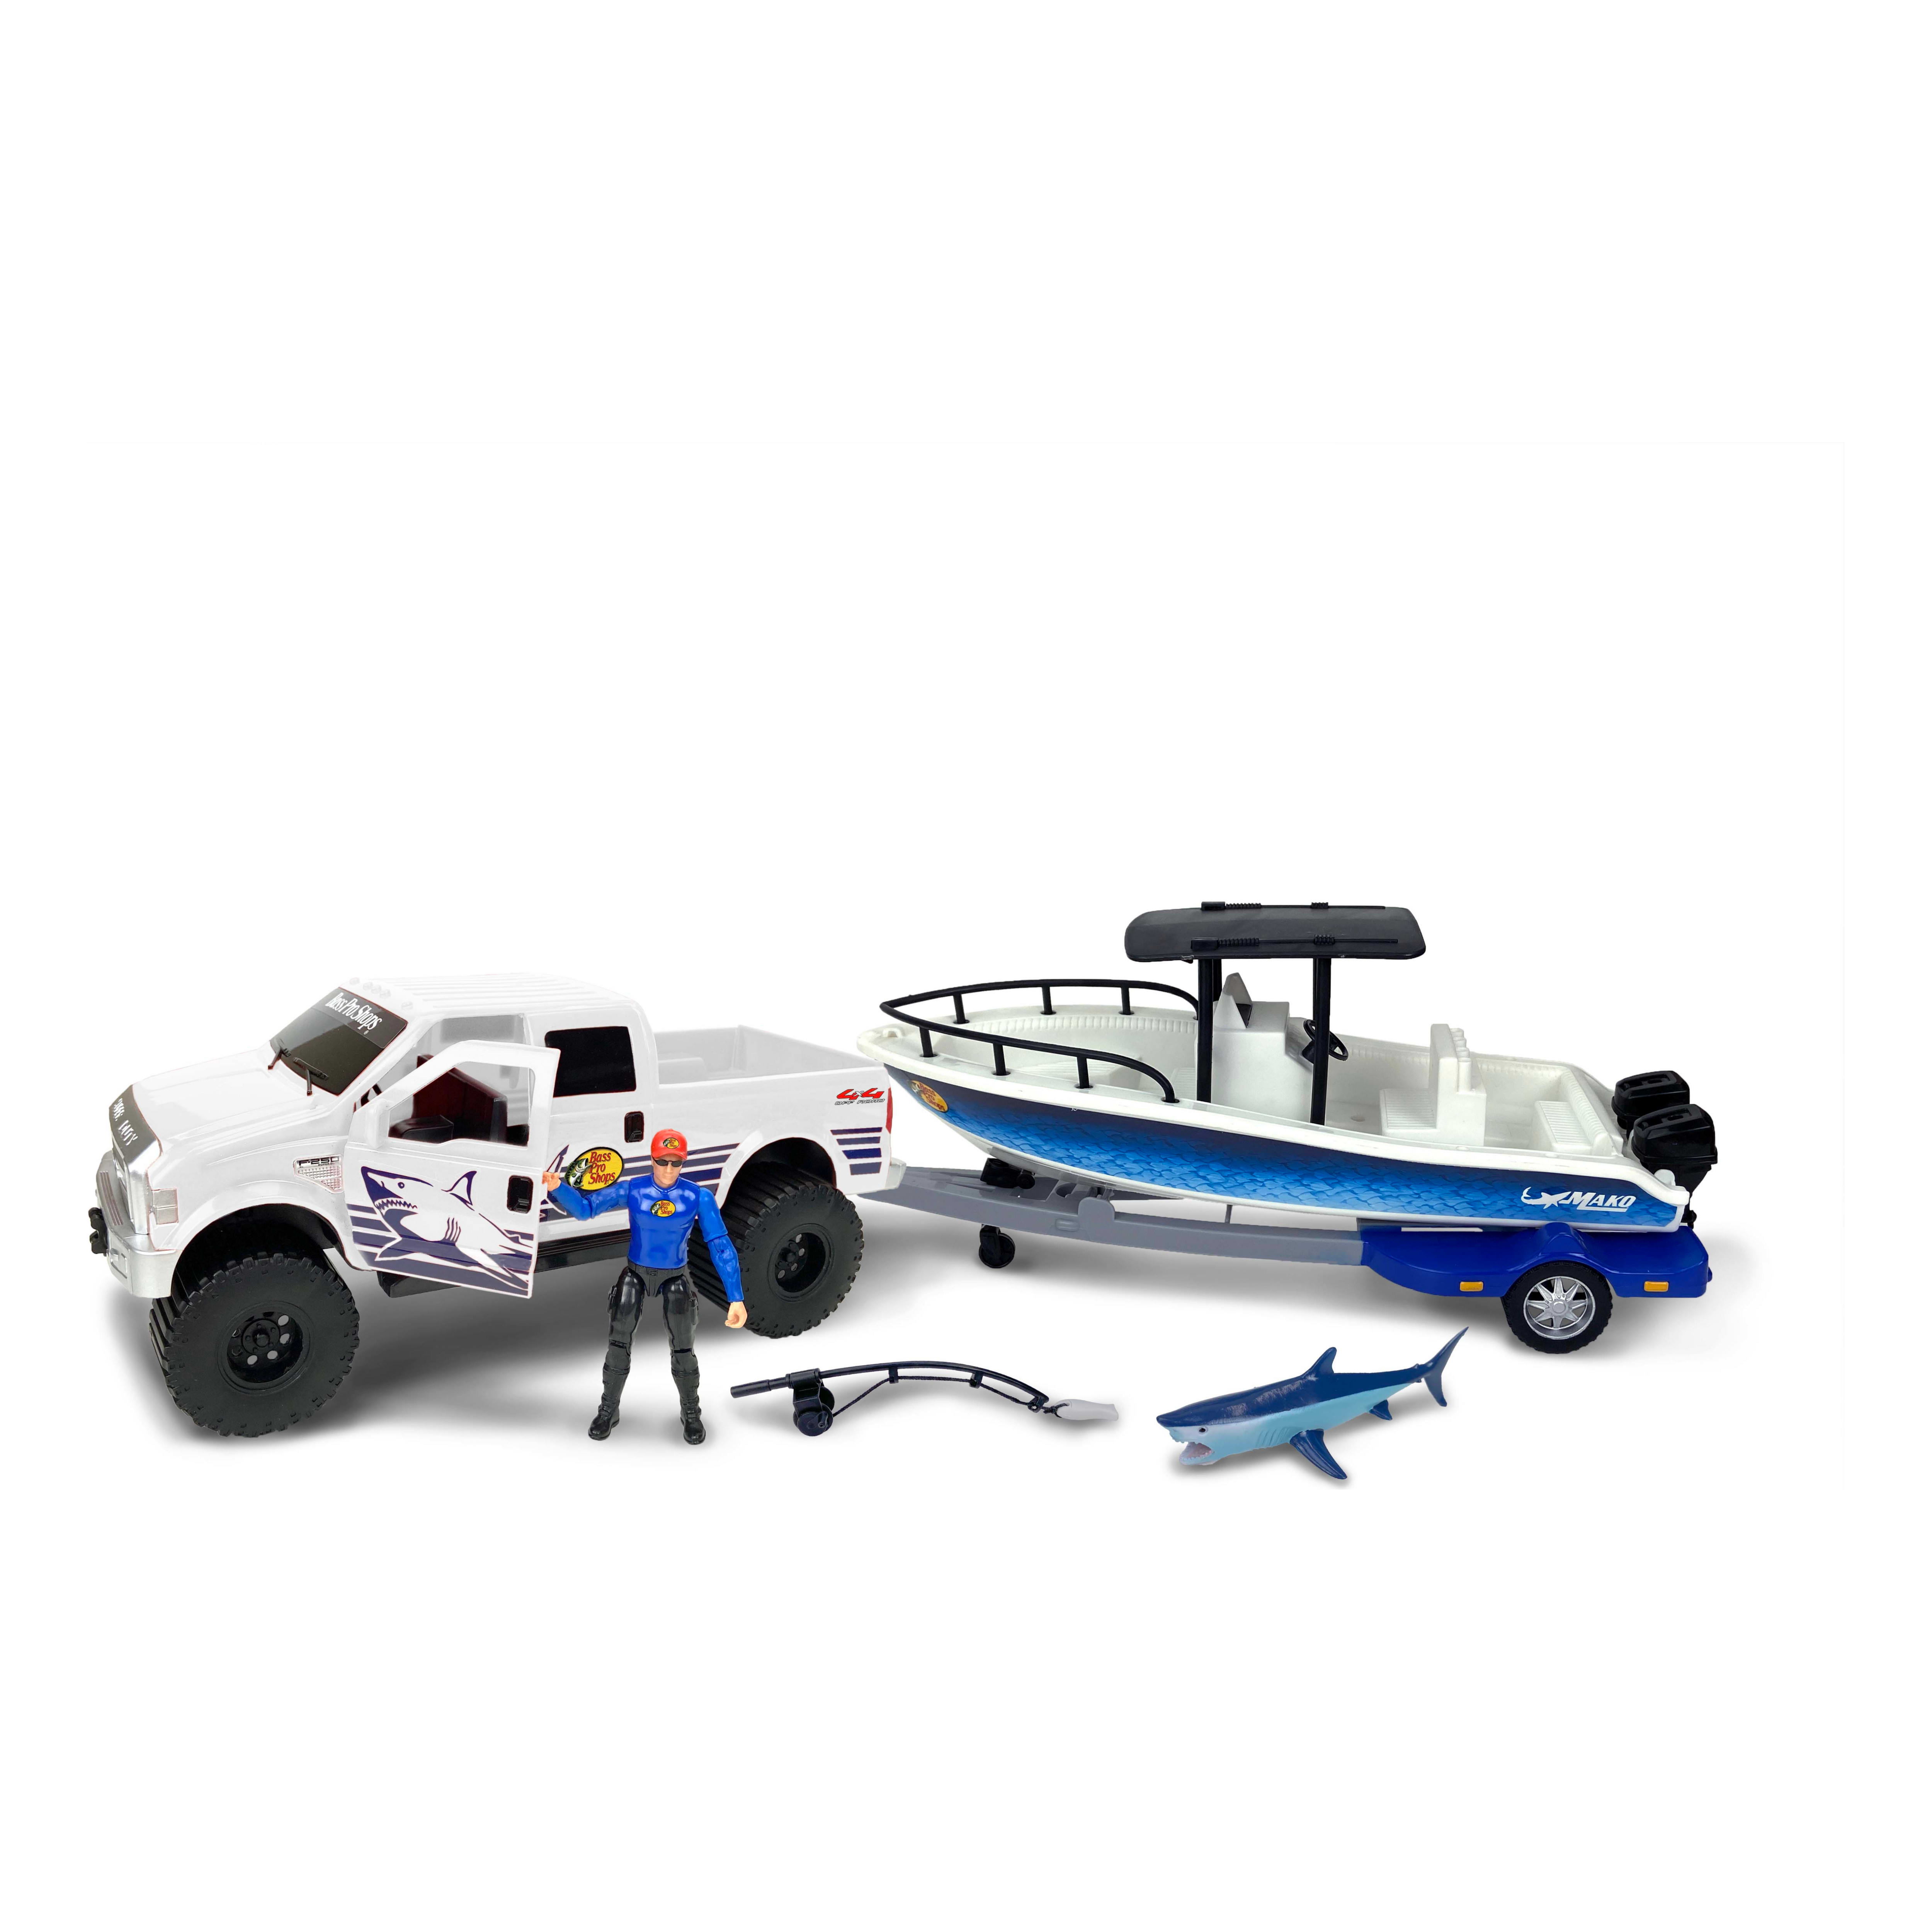 Bass Pro Shops® Imagination Adventure Ford® F-250 Saltwater